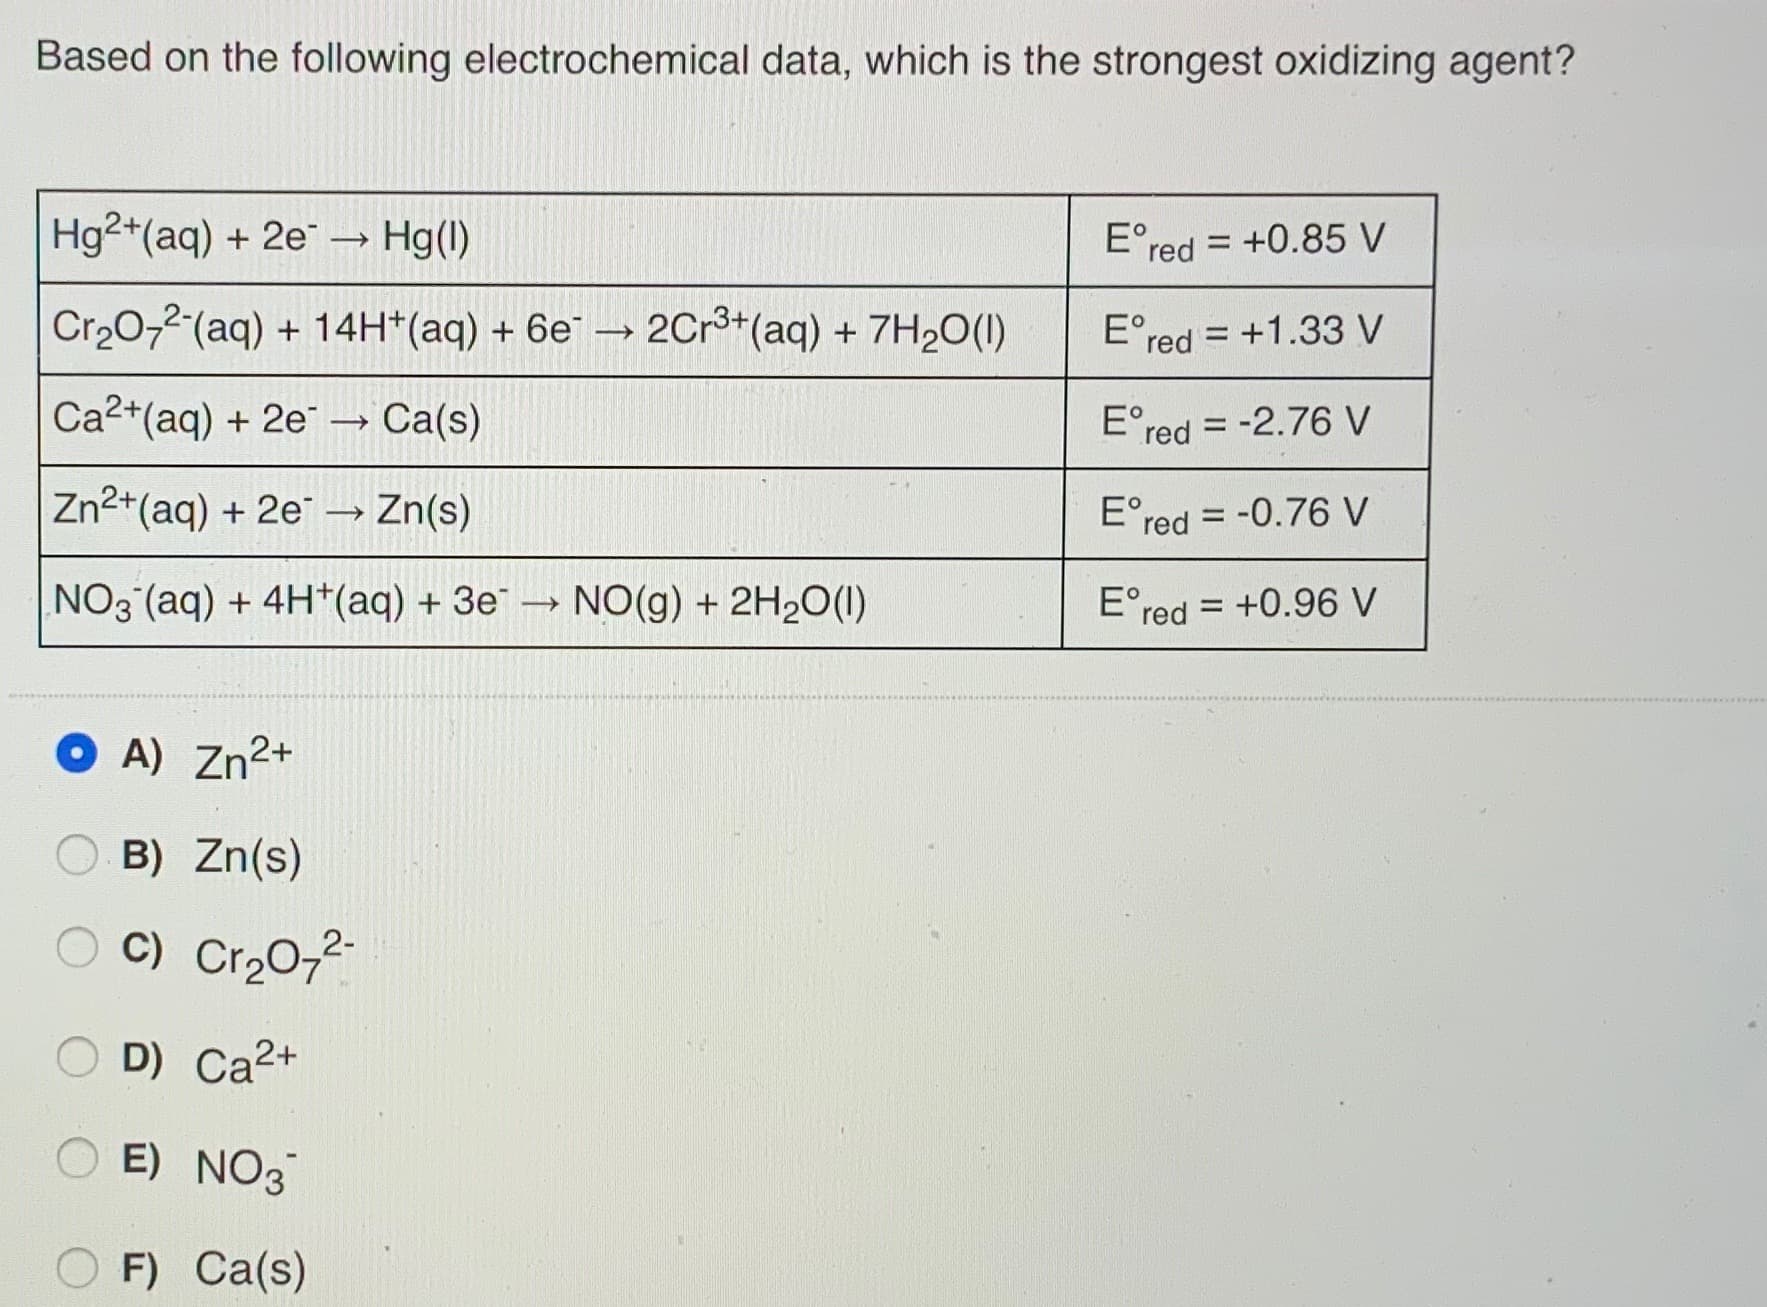 Based on the following electrochemical data, which is the strongest oxidizing agent?
Hg2+(aq) + 2e → Hg(1)
E°red = +0.85 V
Cr20-2 (aq) + 14H*(aq) + 6e¨
→ 2Cr³+(aq) + 7H2O(1I)
E°red = +1.33 V
Ca2+(aq) + 2e → Ca(s)
E°red = -2.76 V
Zn2+(aq) + 2e → Zn(s)
E°red = -0.76 V
%3D
NO3 (aq) + 4H*(aq) + 3e¯ → NO(g) + 2H2O(1)
E°red = +0.96 V
O A) Zn2+
B) Zn(s)
C) Cr20-²-
D) Ca2+
E) NO3
F) Ca(s)
